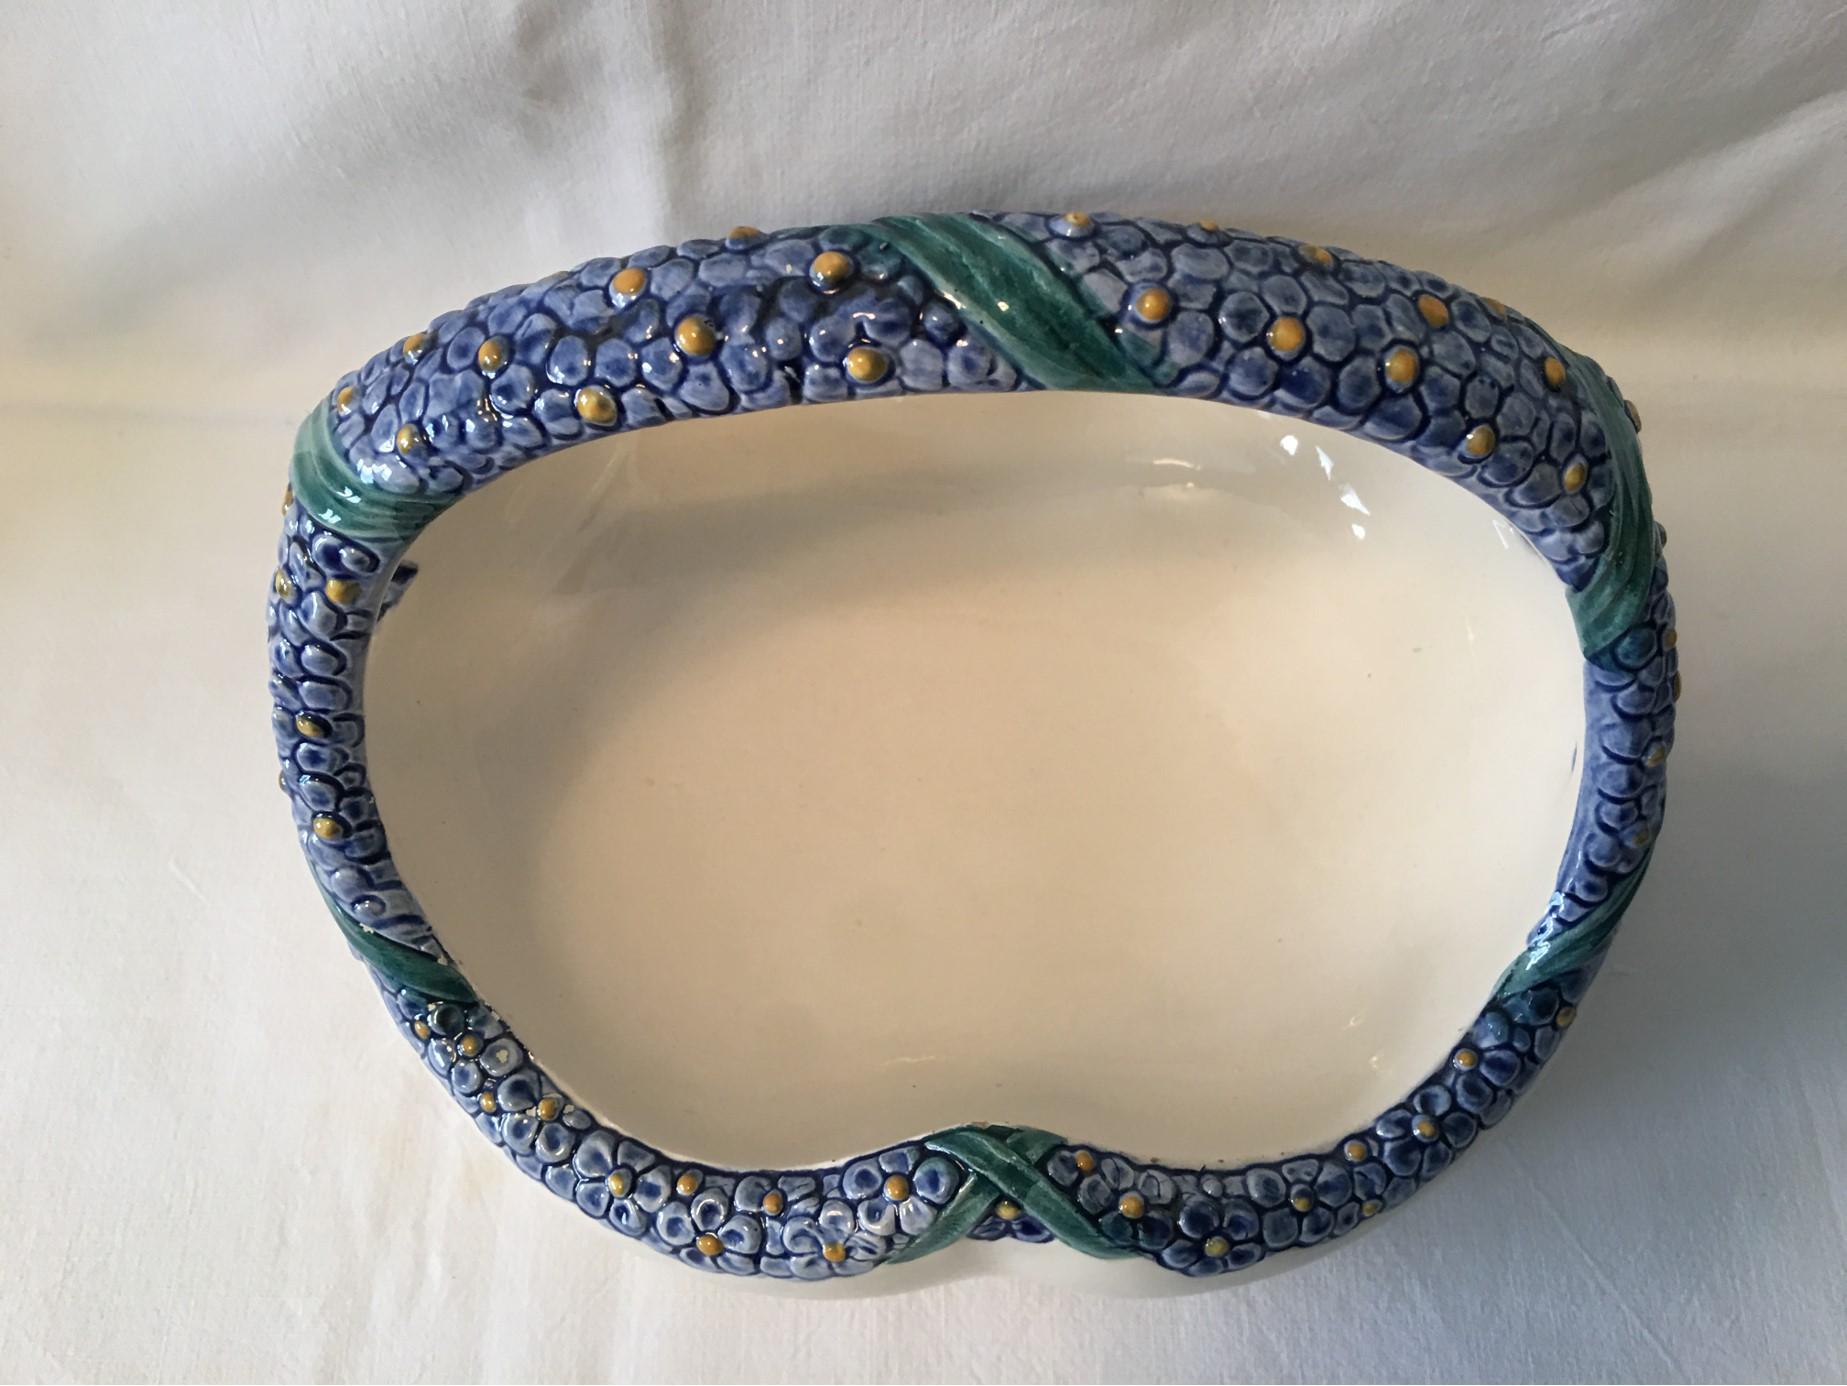 This beautiful ceramic flower basket was created by Karlsruhe Majolika sometime between 1911 and 1930. It was designed by Max Heinze in 1911. It is a great way to present Bonbons or Business cards or a variety of items in any environment. No damages.